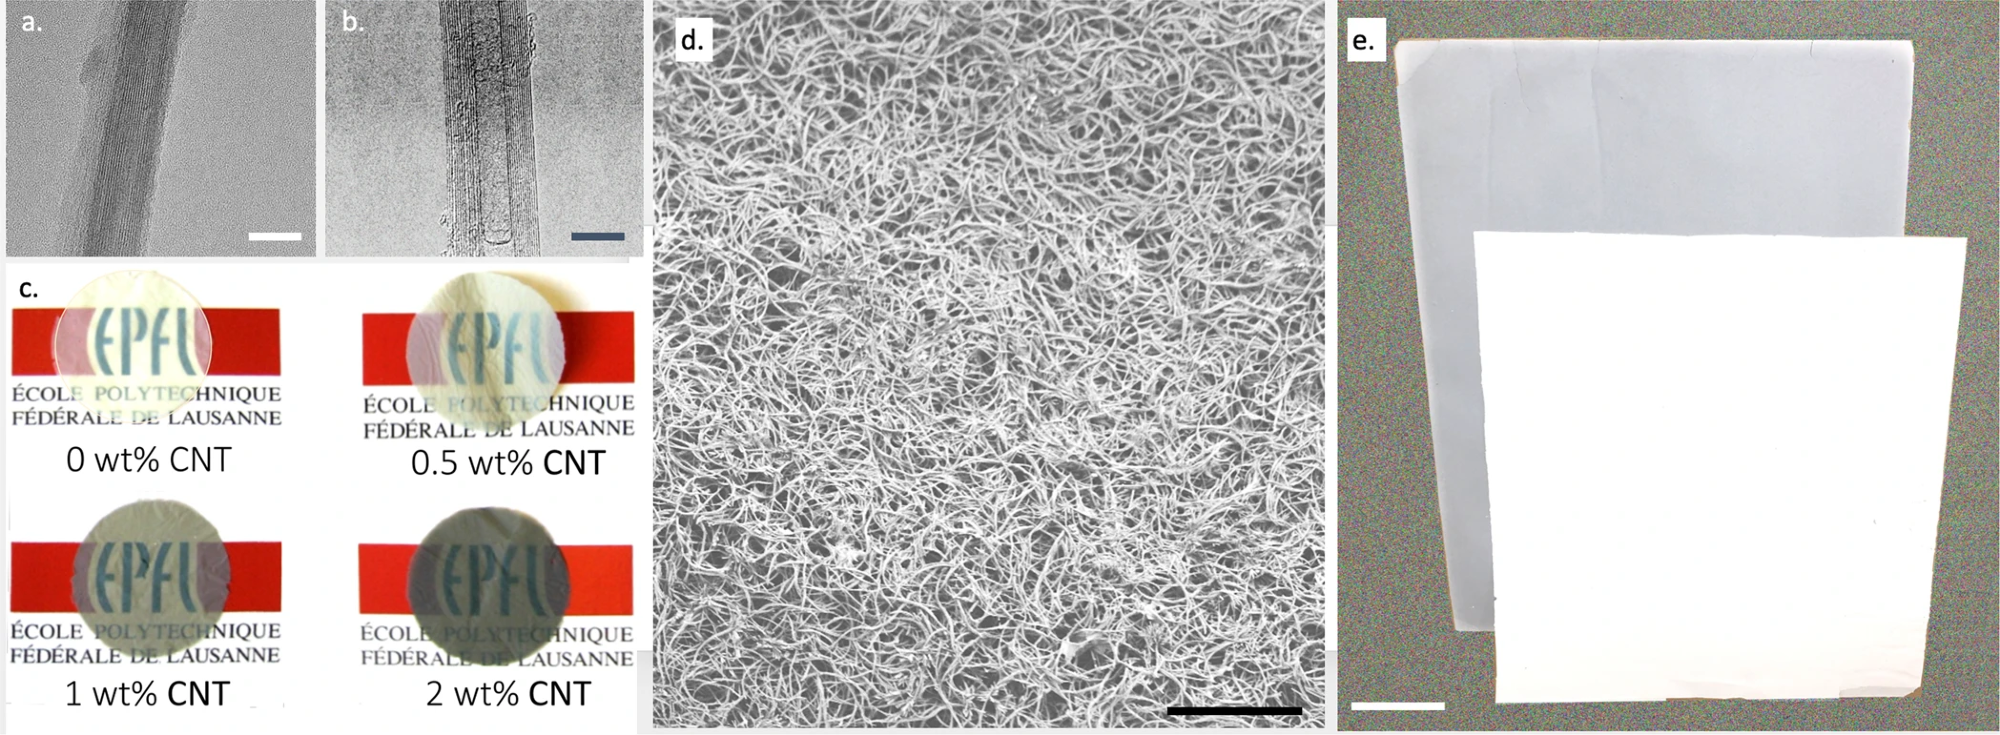 From nanowires and nanotubes to large area filter paper. a, b HR TEM images of the essential individual nano-structural components of the composite filter material, i.e., a single TiO2NW and a single multiwalled CNT, respectively. The length of both nanoelements can reach several micrometers (The scalebars are 10?nm).; (c) Photos of selected samples of TiO2NWs-based filter paper with various wt% contents of CNTs, which alters their transparency (the diameter of the filter paper disc is of 20?mm); d Characteristic SEM image of the filter paper (The scalebar is 5?µm is 5b, (e) Photo of large area filter papers synthesized from pure TiO2NWs (front) and containing 1?wt% content of CNTs (grayish). (The scalebar is 10?cm).